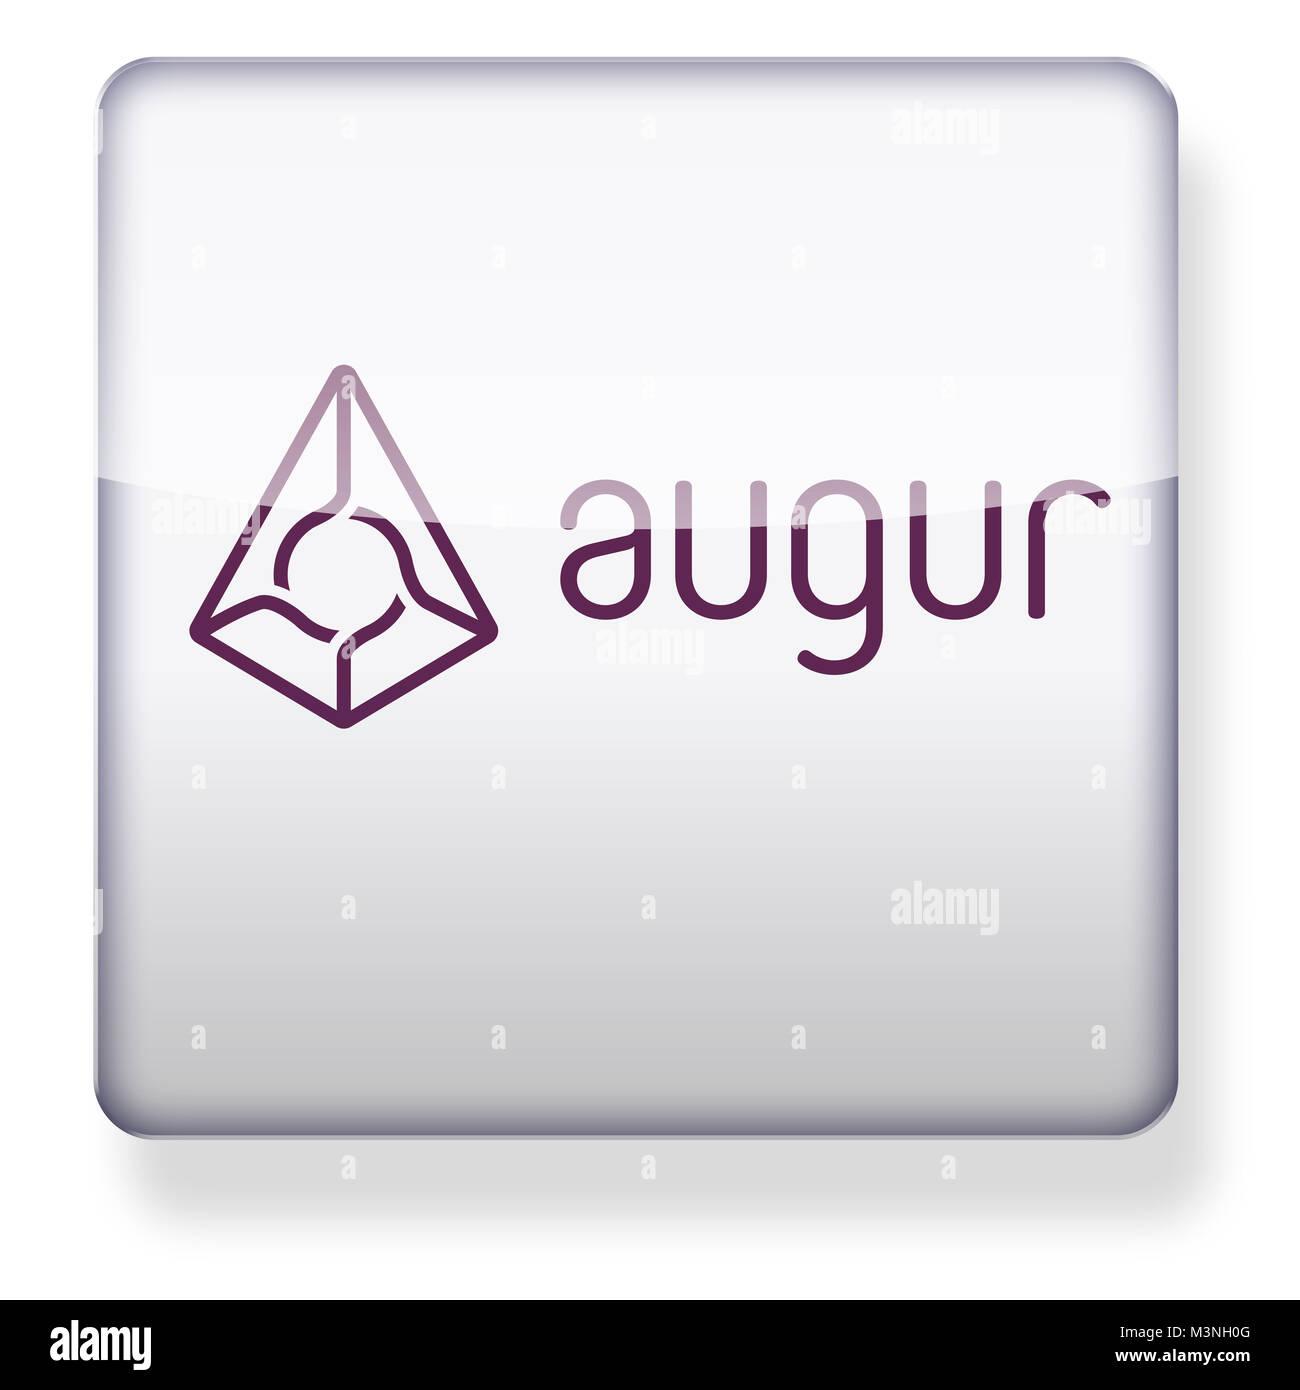 Augur cryptocurrency REP logo as an app icon. Clipping path included. Stock Photo